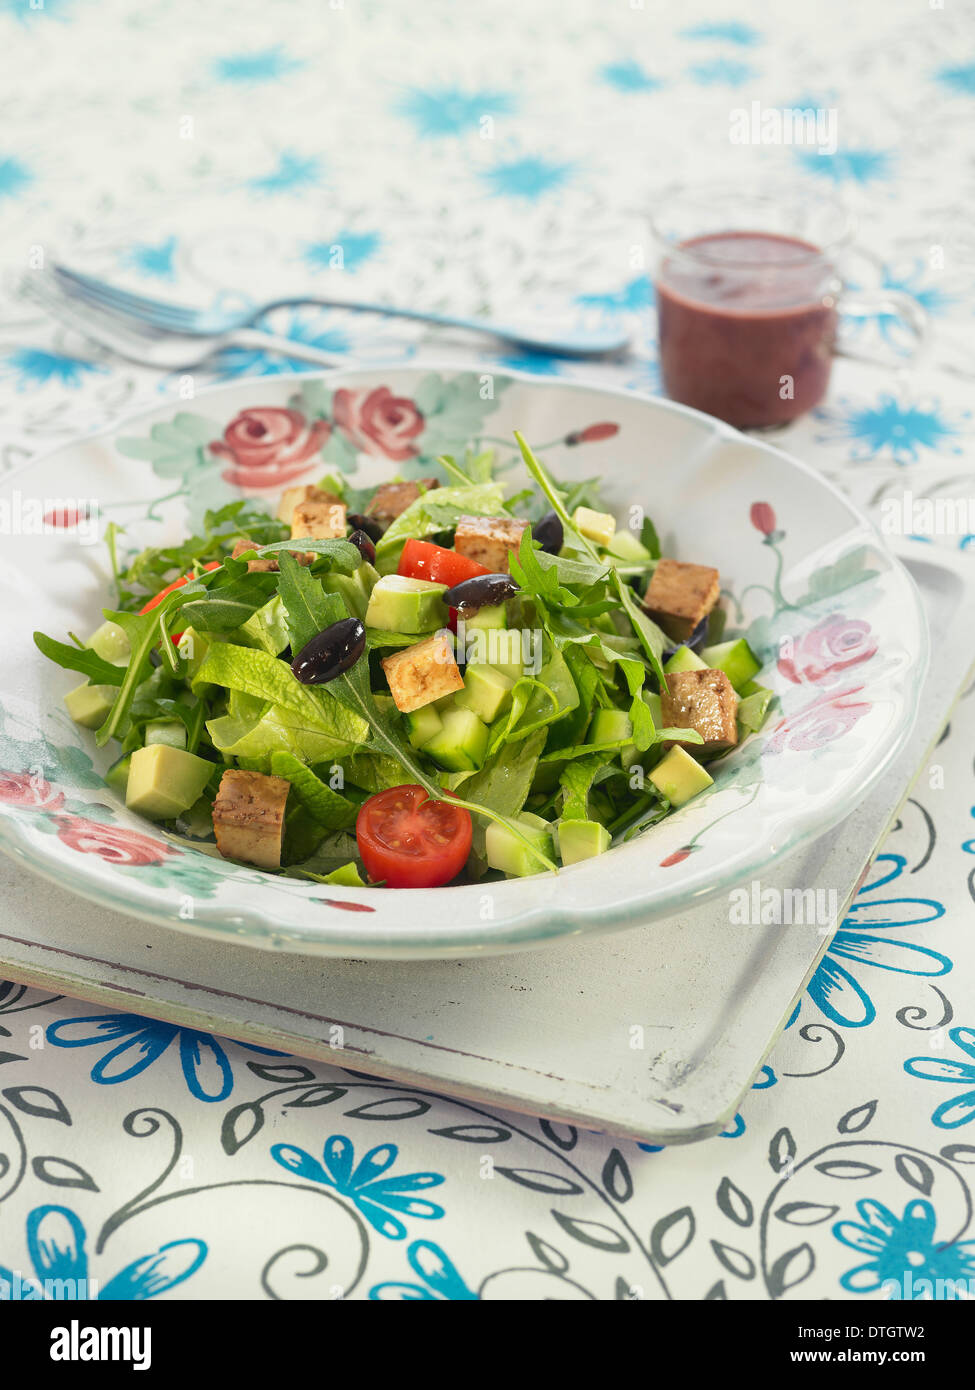 Lettuce,seitan, tomato and olive salad with beetroot salad Stock Photo